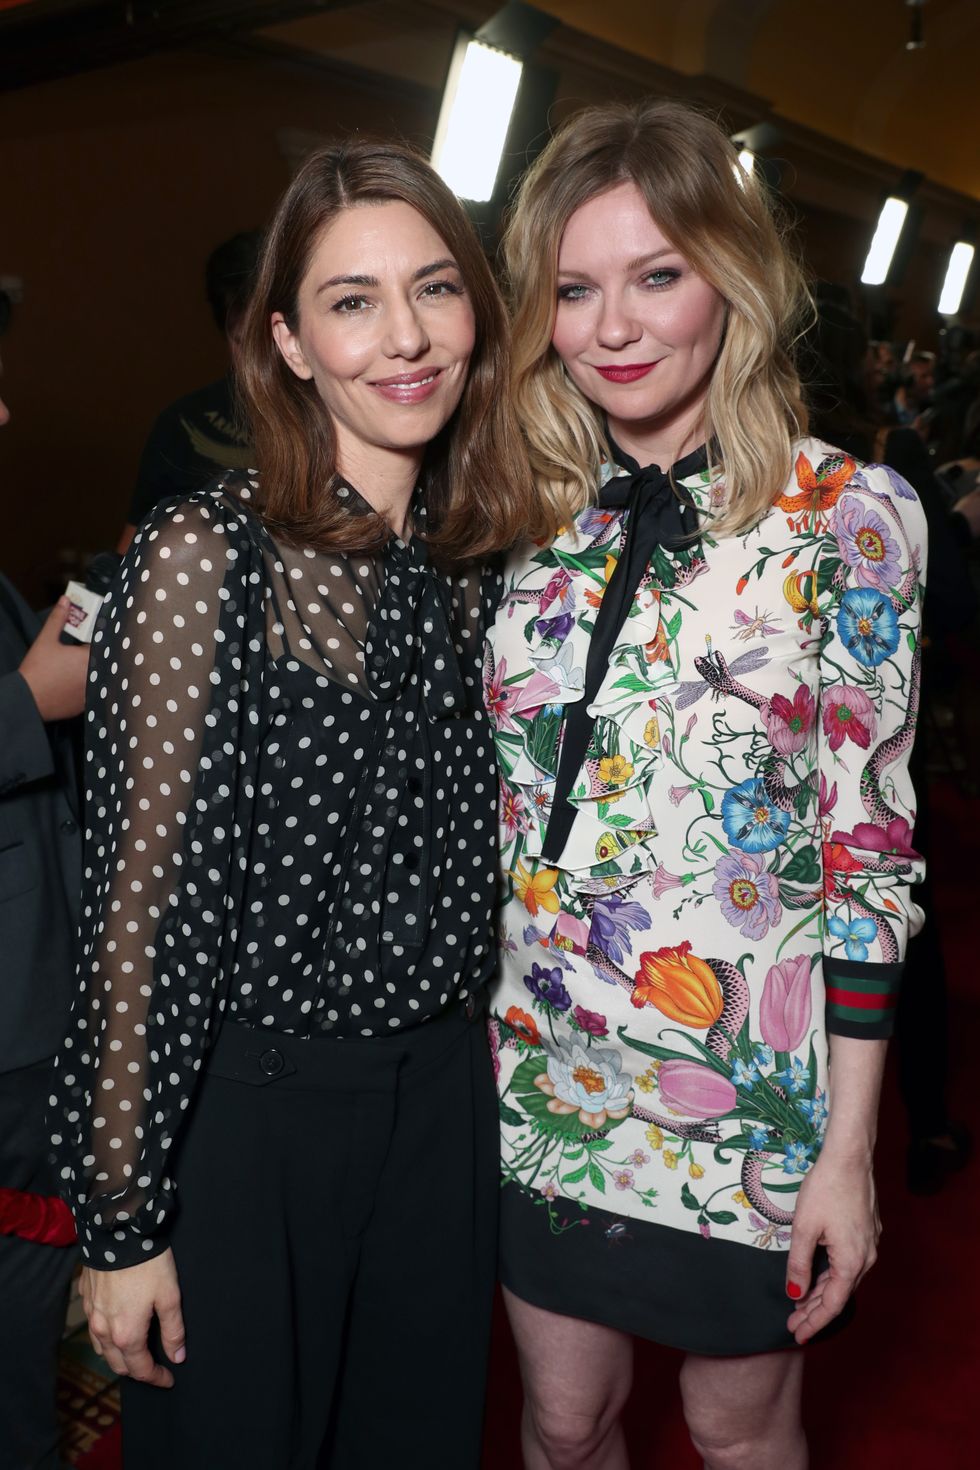 Sofia Coppola: Women in my films are parts of me at different stages of my  life